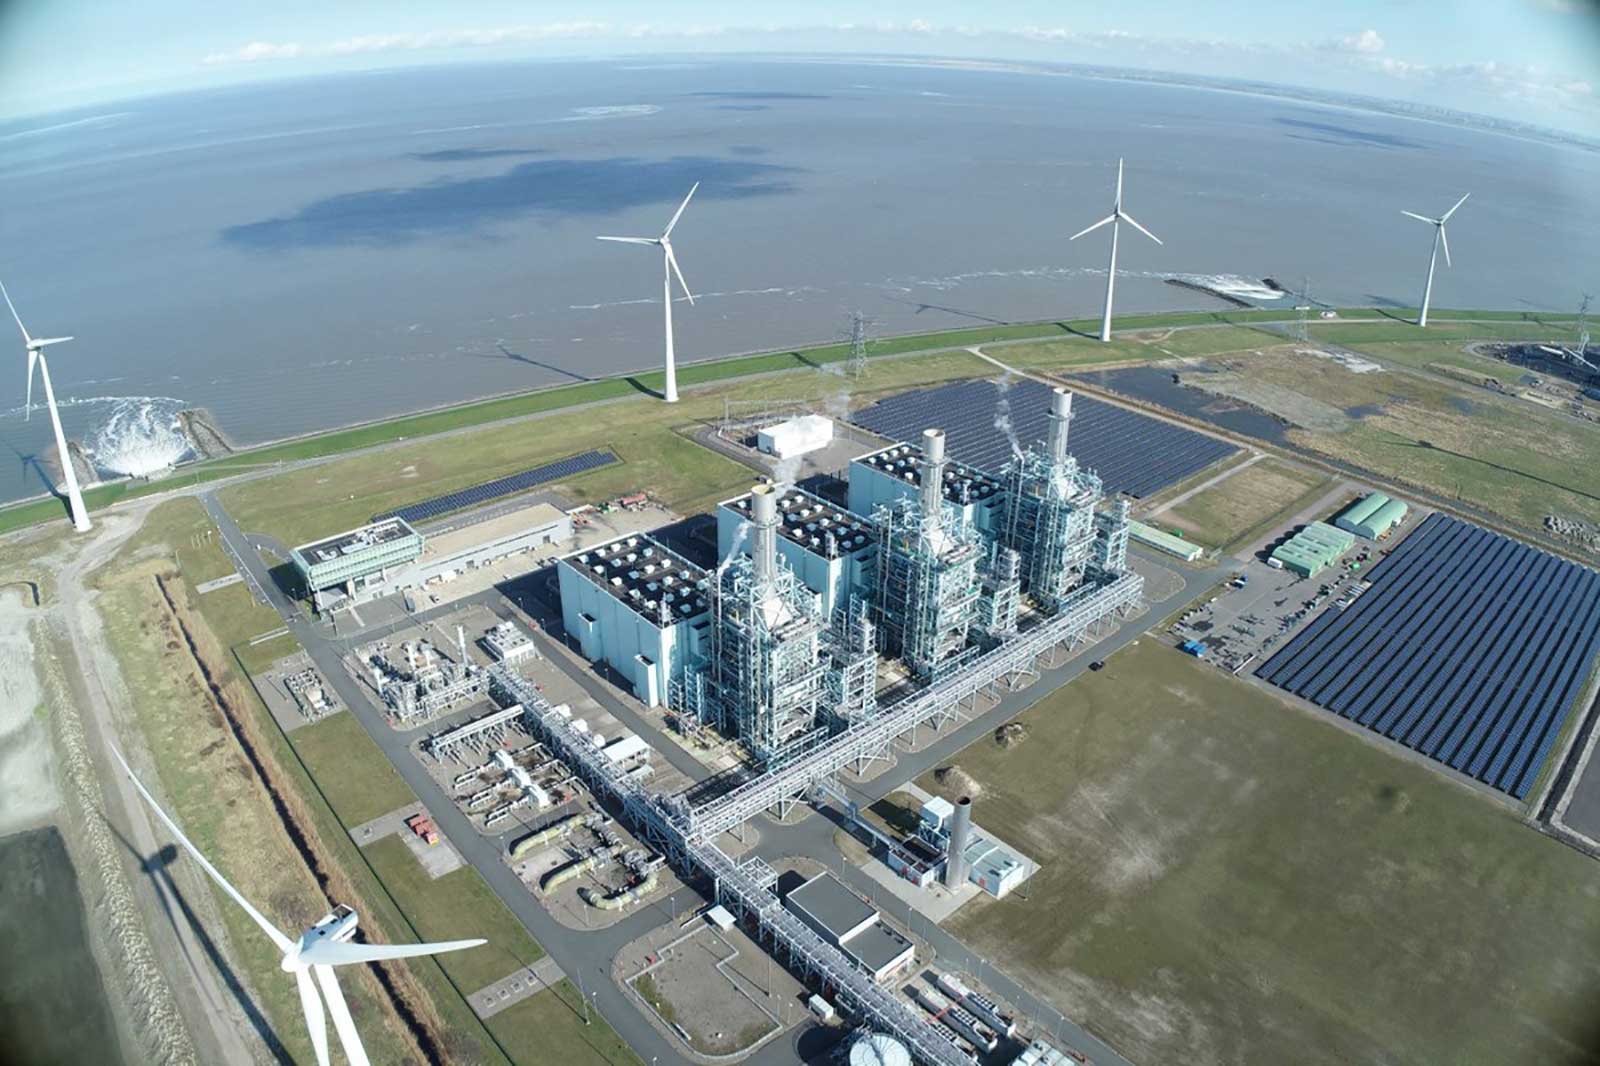 RWE acquires 1.4-gigawatt power plant from Vattenfall and develops Eemshaven site into a leading energy and hydrogen hub in Northwest Europe